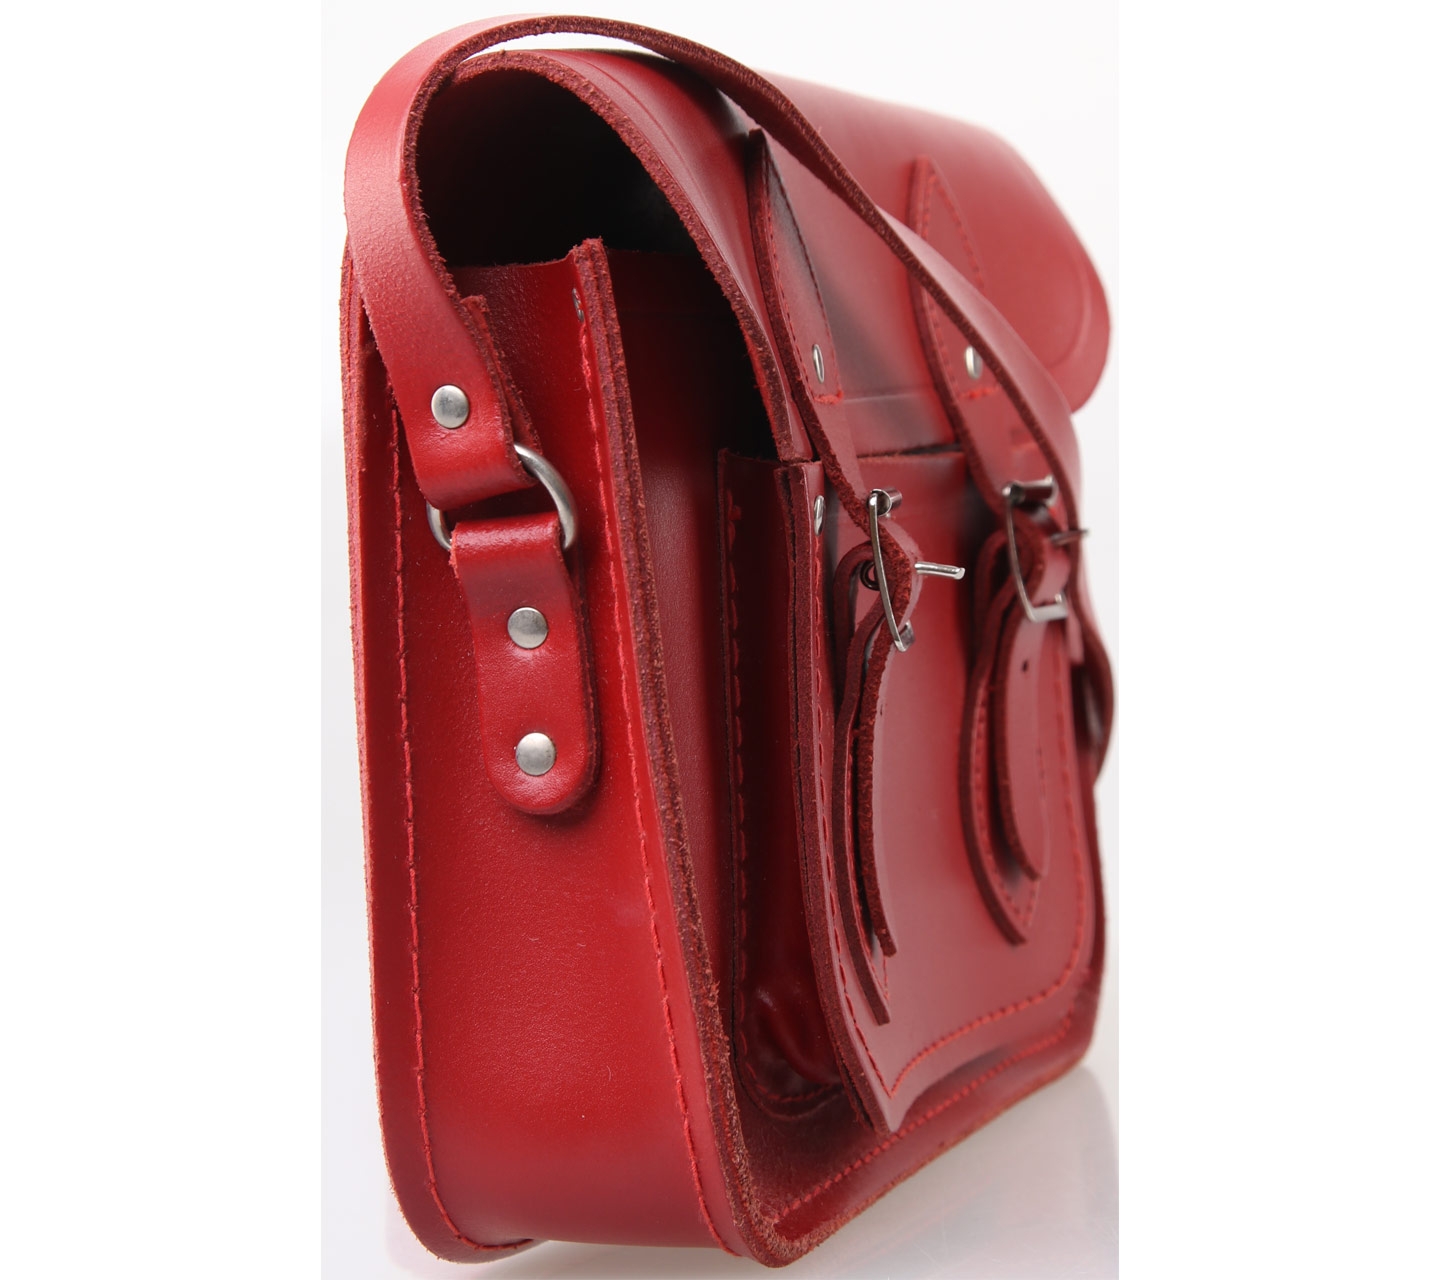 The Cambridge Satchel Company Red Sling Bag